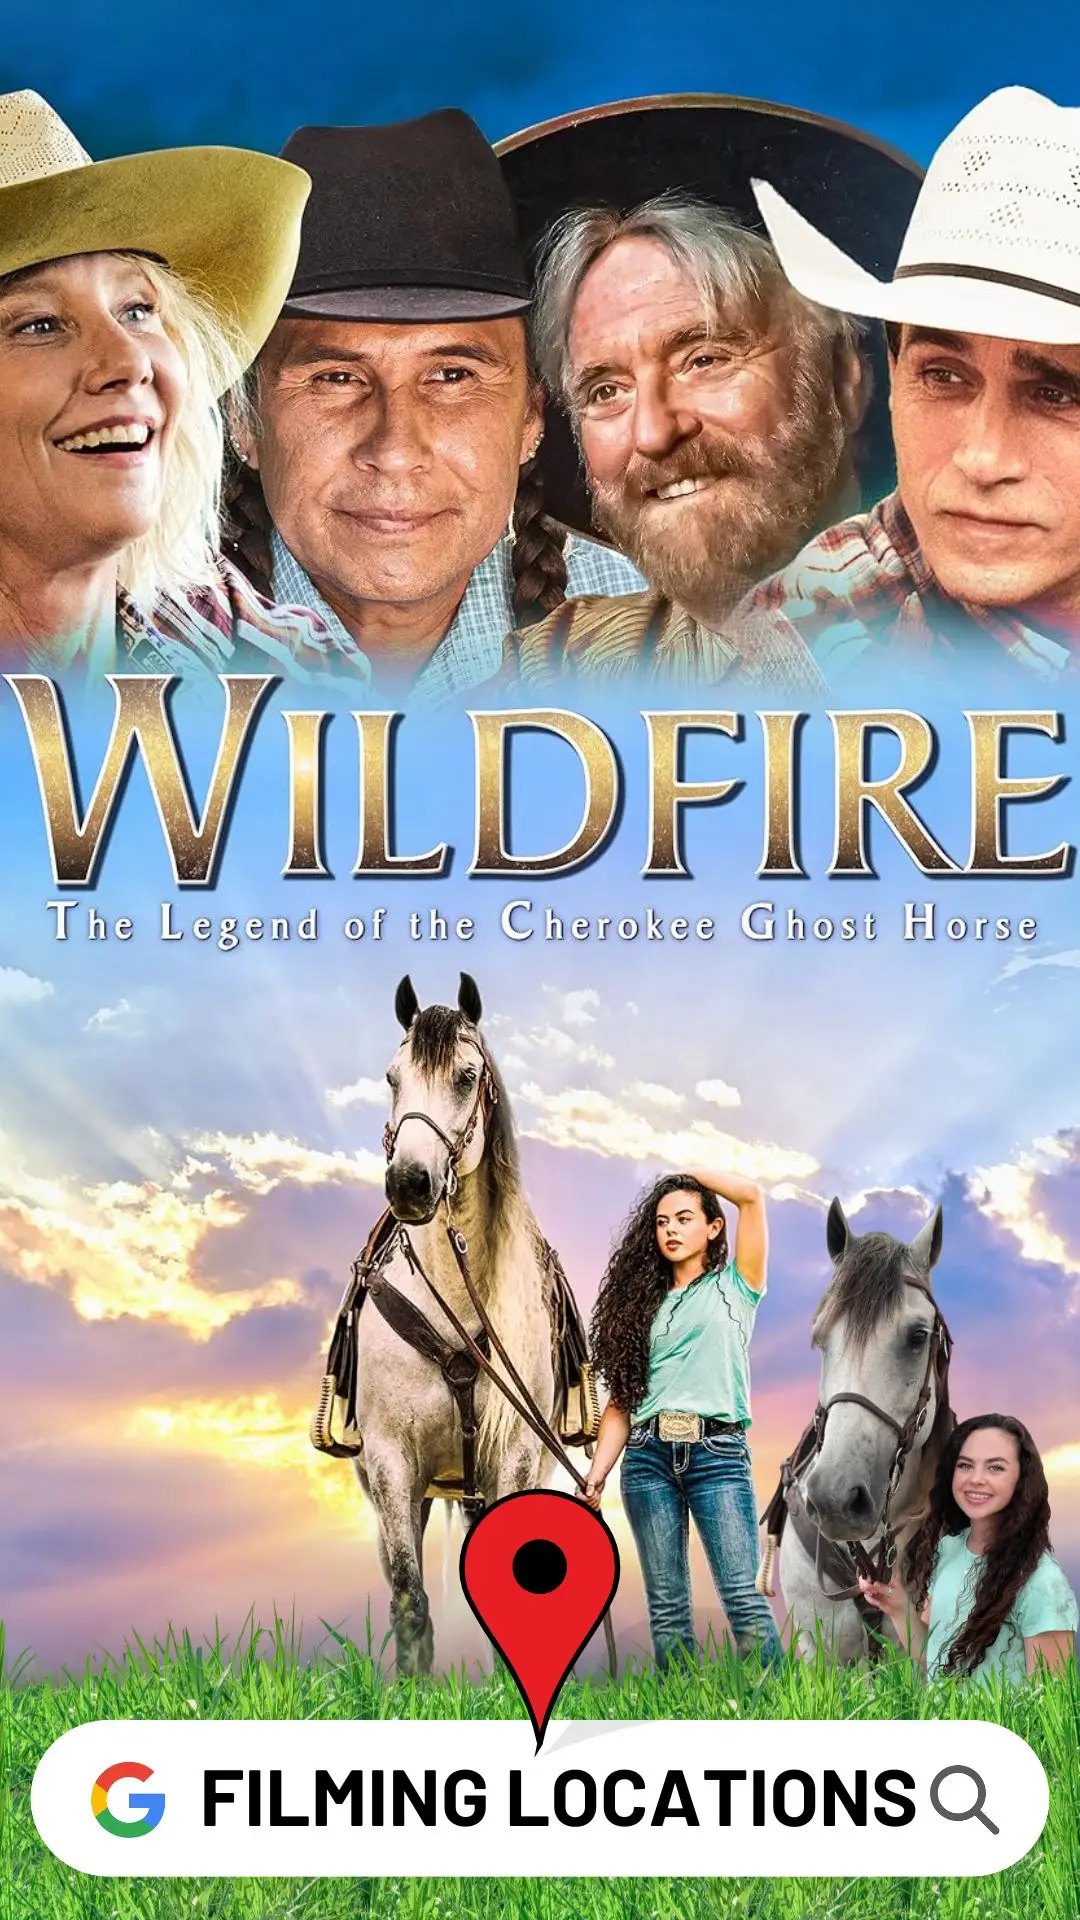 Wildfire Filming Locations